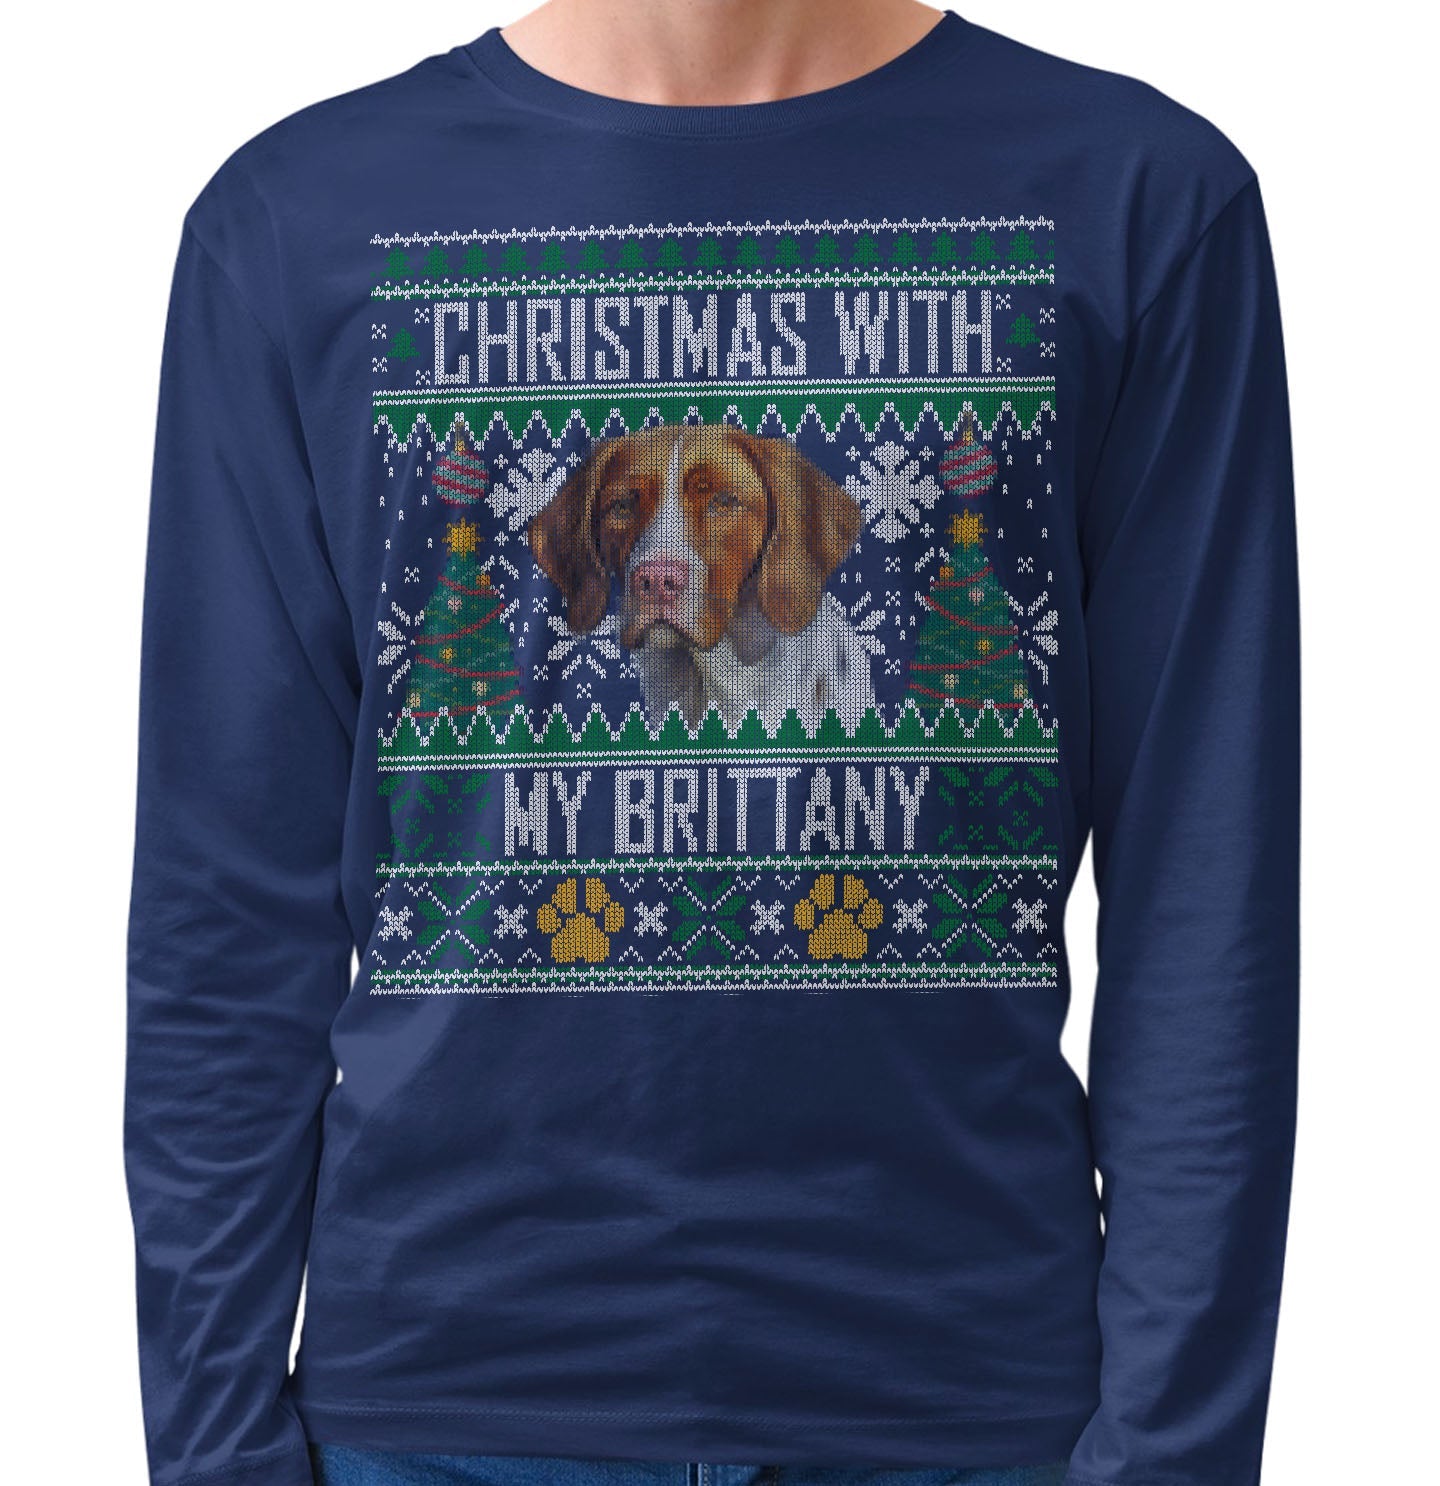 Ugly Sweater Christmas with My Brittany - Adult Unisex Long Sleeve T-Shirt